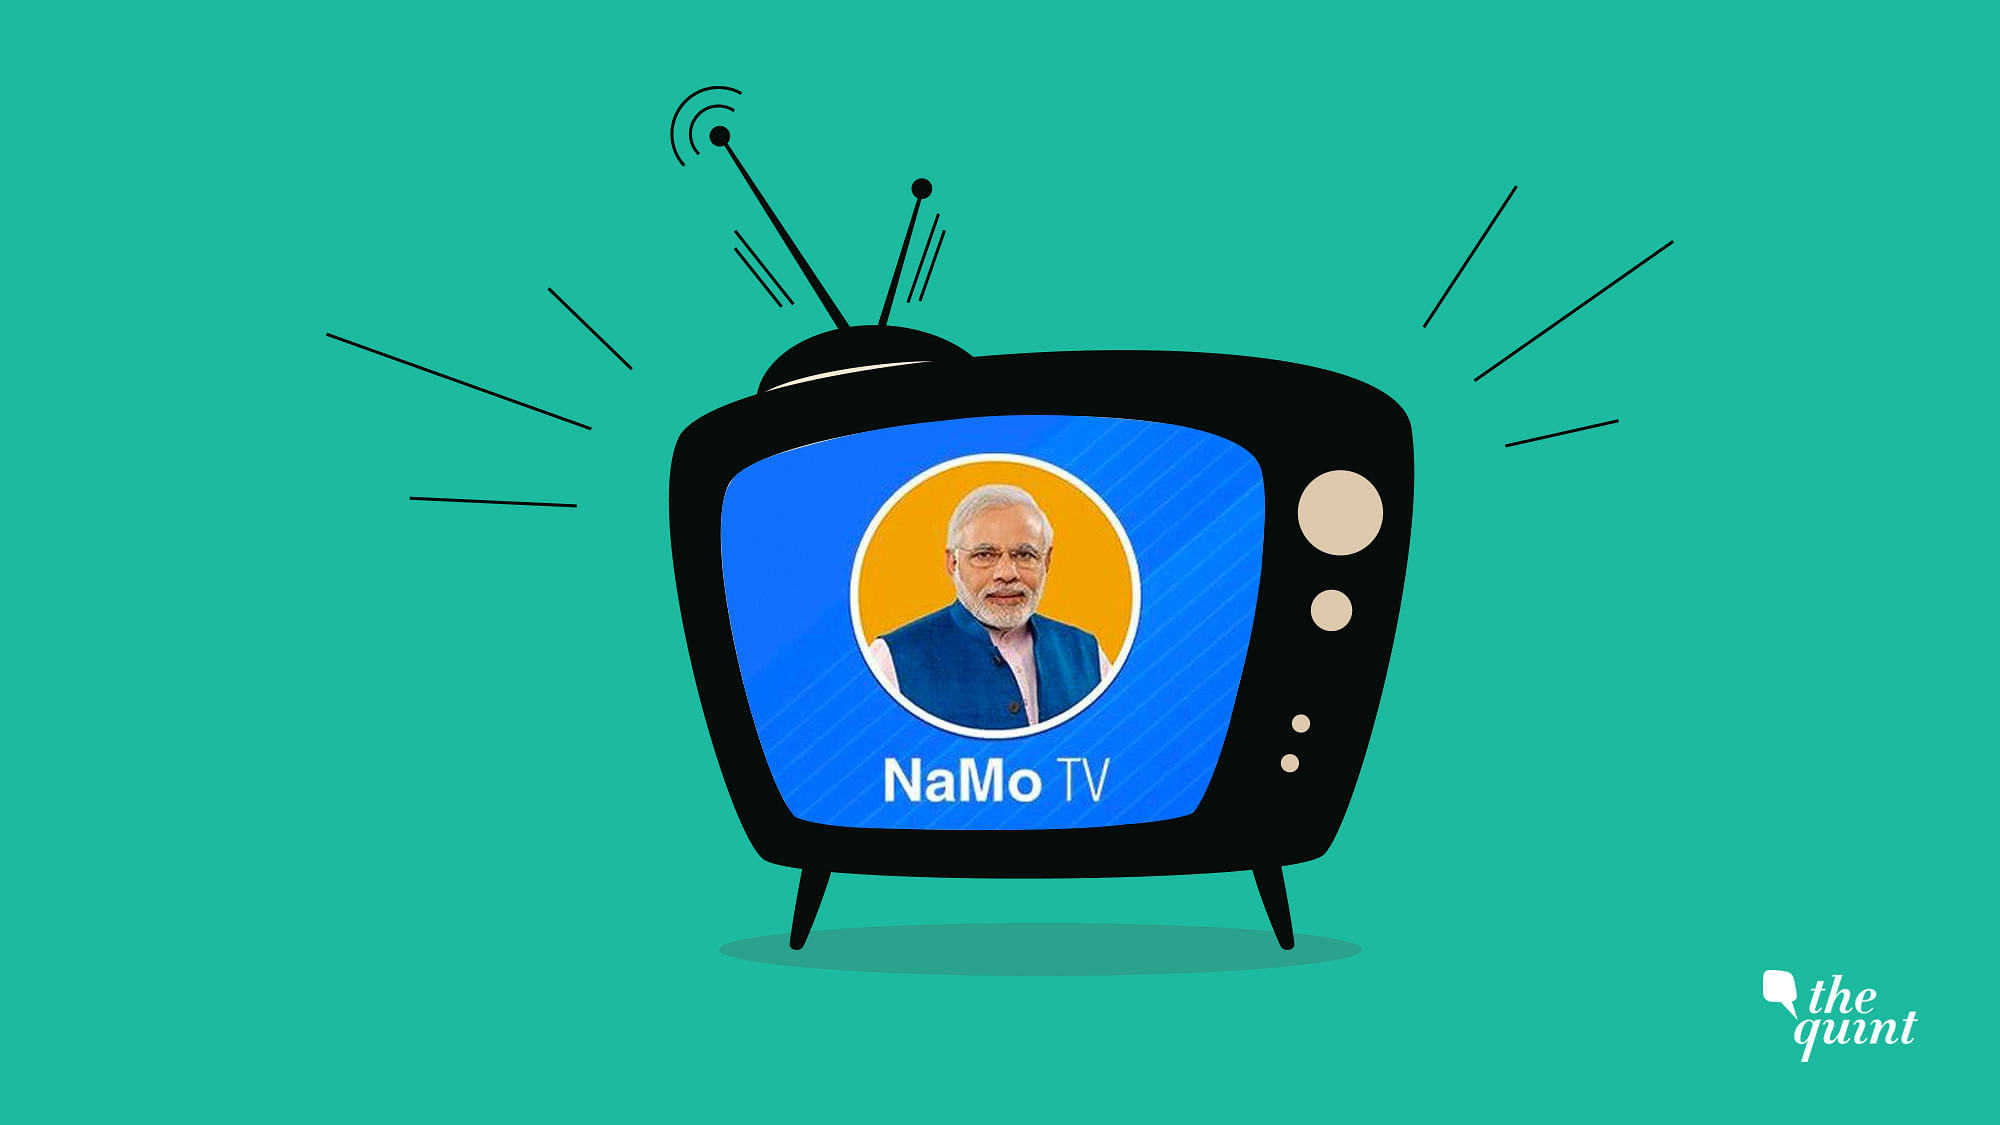 The I&amp;B Ministry is learnt to have said that NaMo TV is an ad platform launched by DTH service providers.